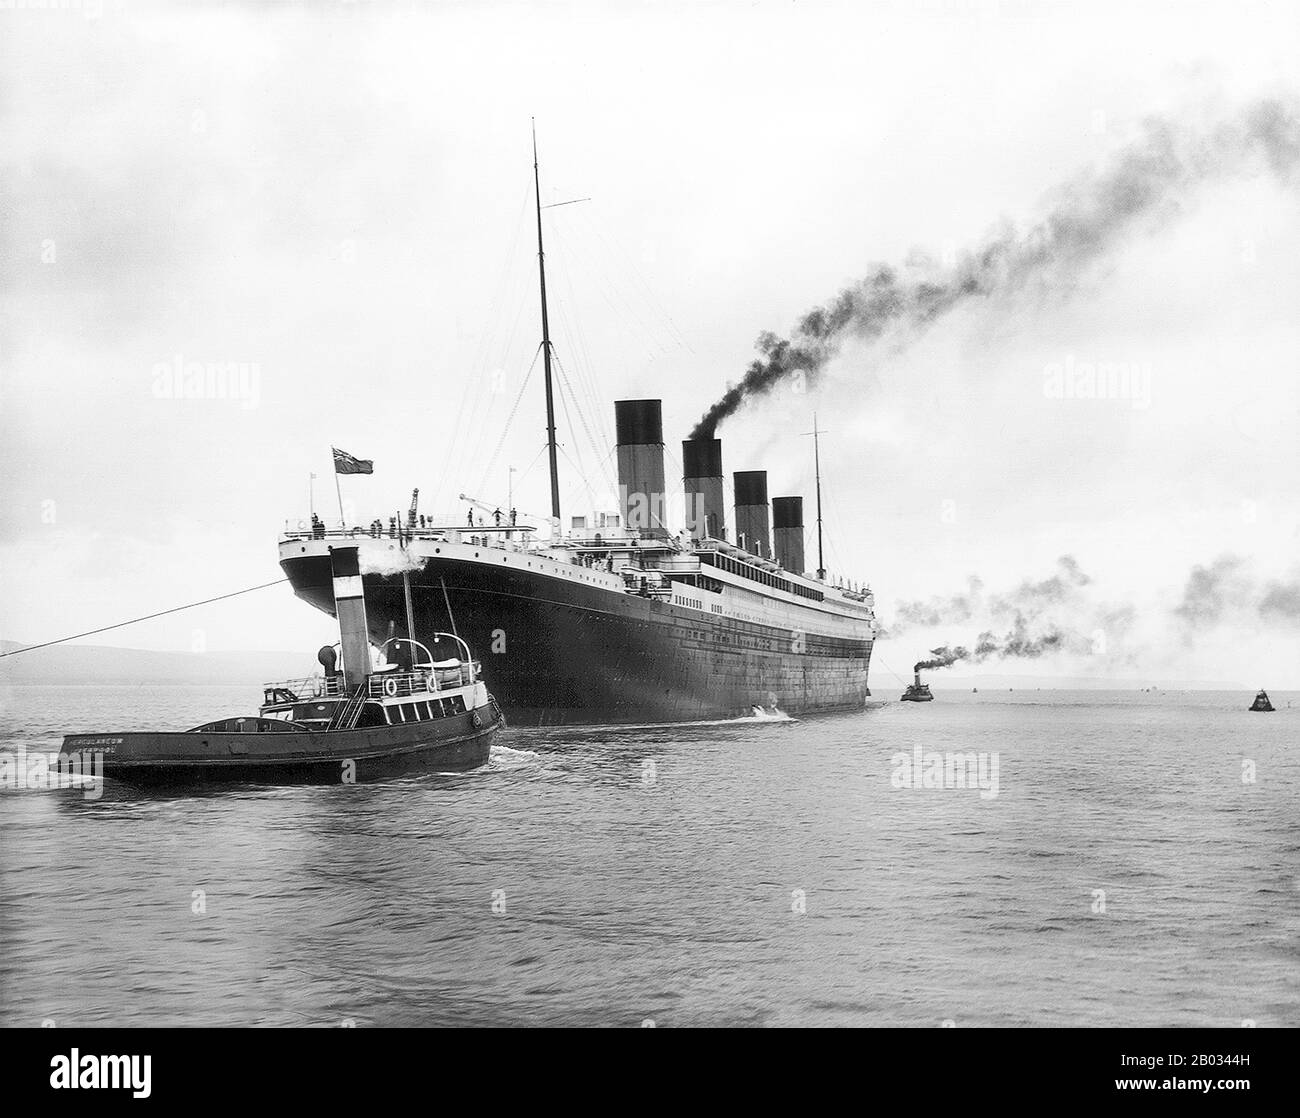 Rms Titanic Was A British Passenger Liner That Sank In The North Atlantic Ocean In The Early Morning Of 15 April 1912 After Colliding With An Iceberg During Her Maiden Voyage From